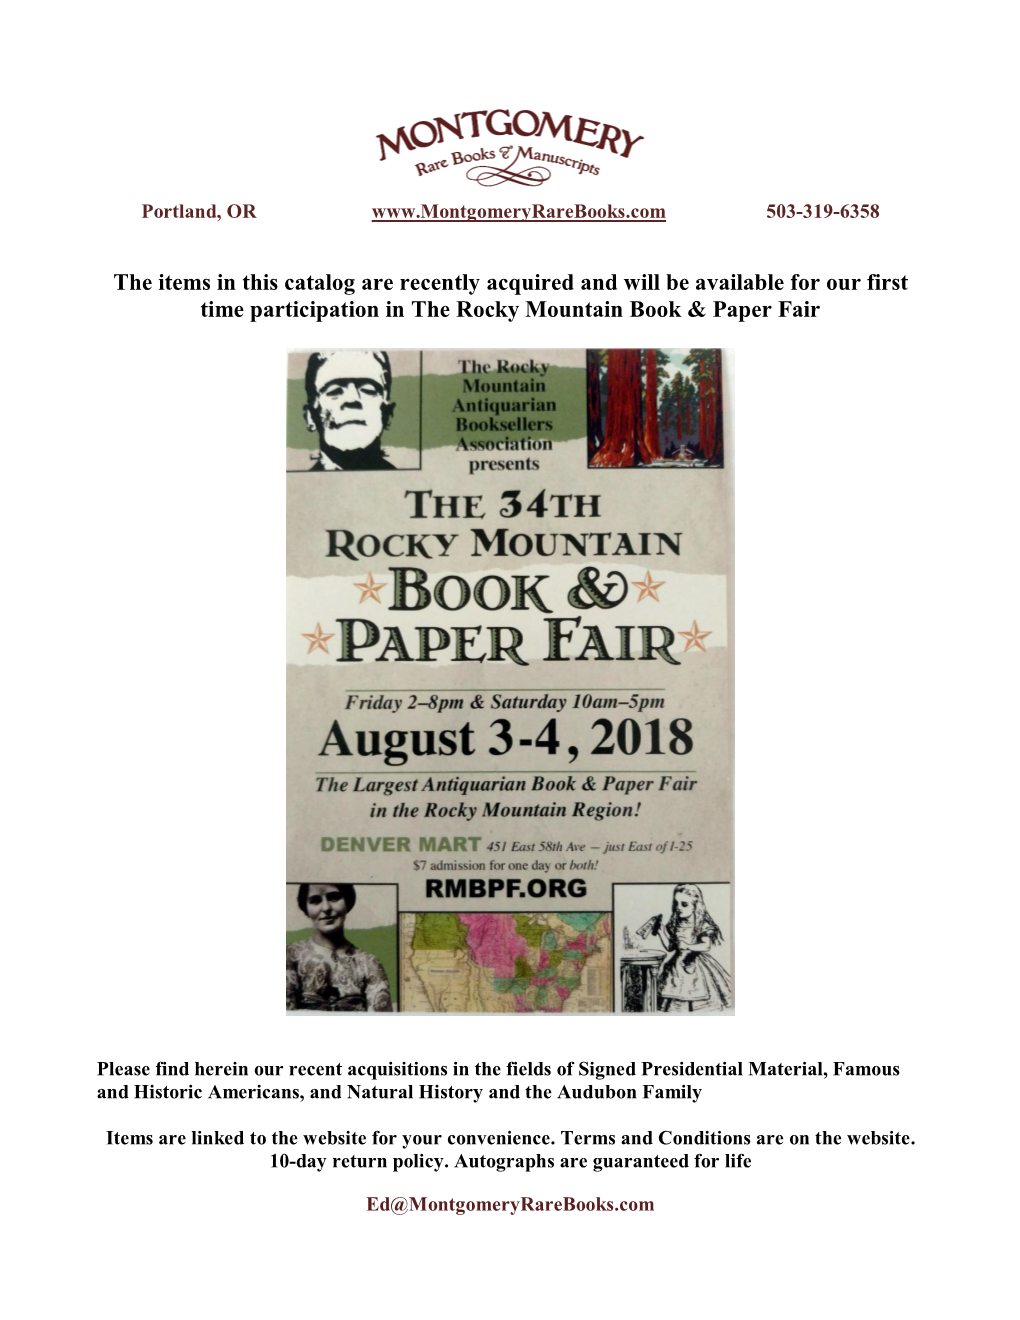 The Items in This Catalog Are Recently Acquired and Will Be Available for Our First Time Participation in the Rocky Mountain Book & Paper Fair